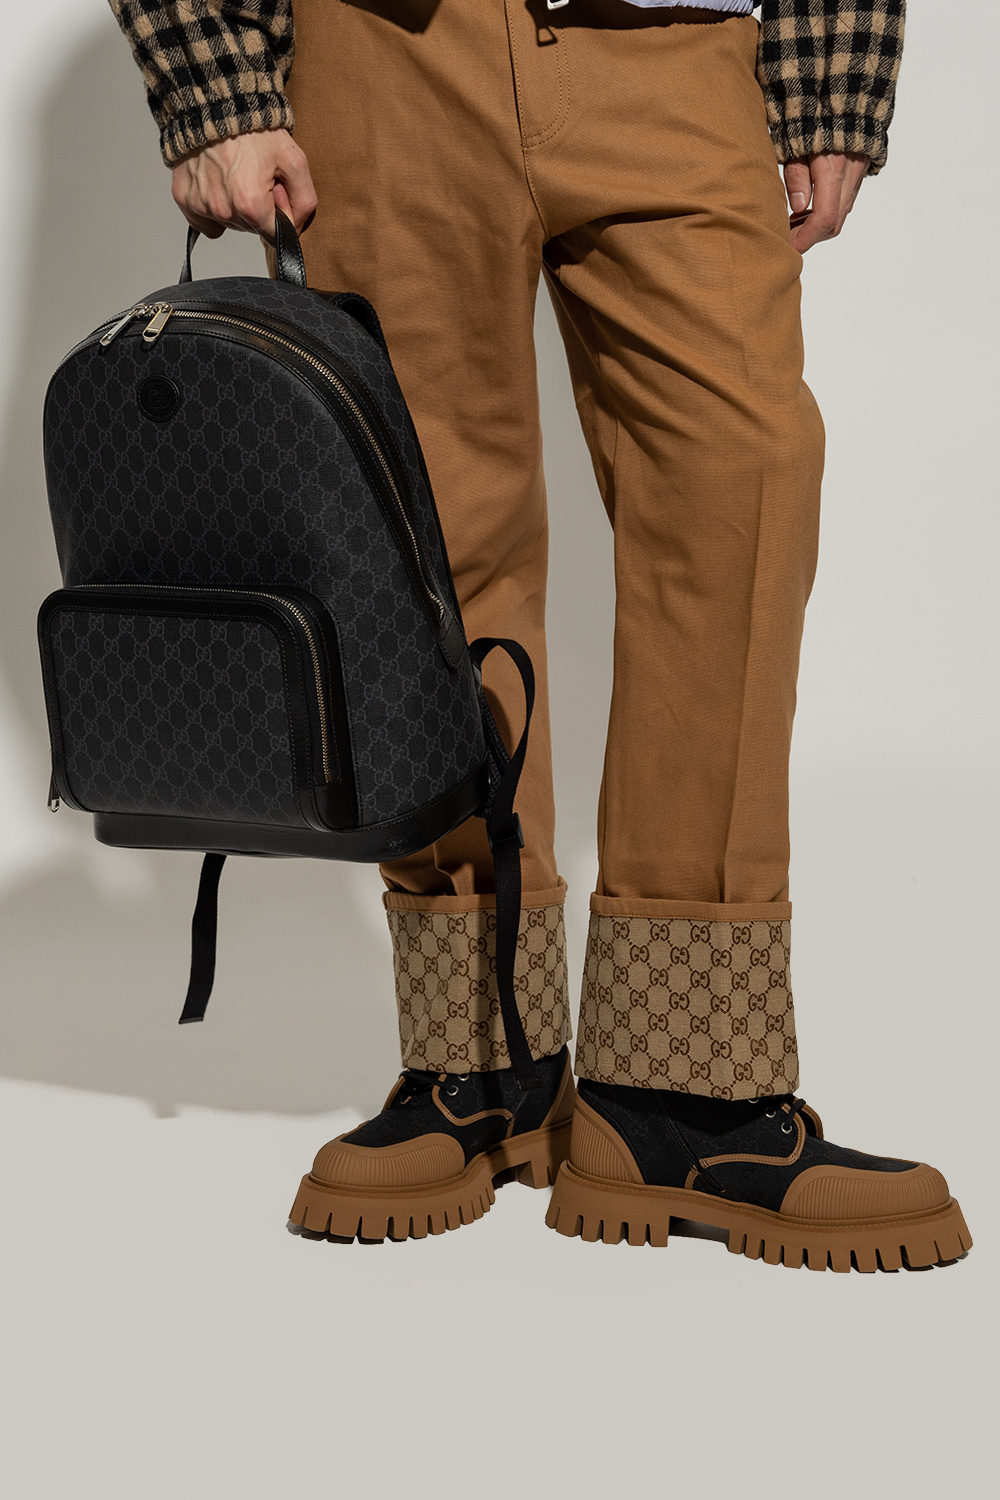 Buy Gucci Gucci GG Supreme Canvas Backpack Online